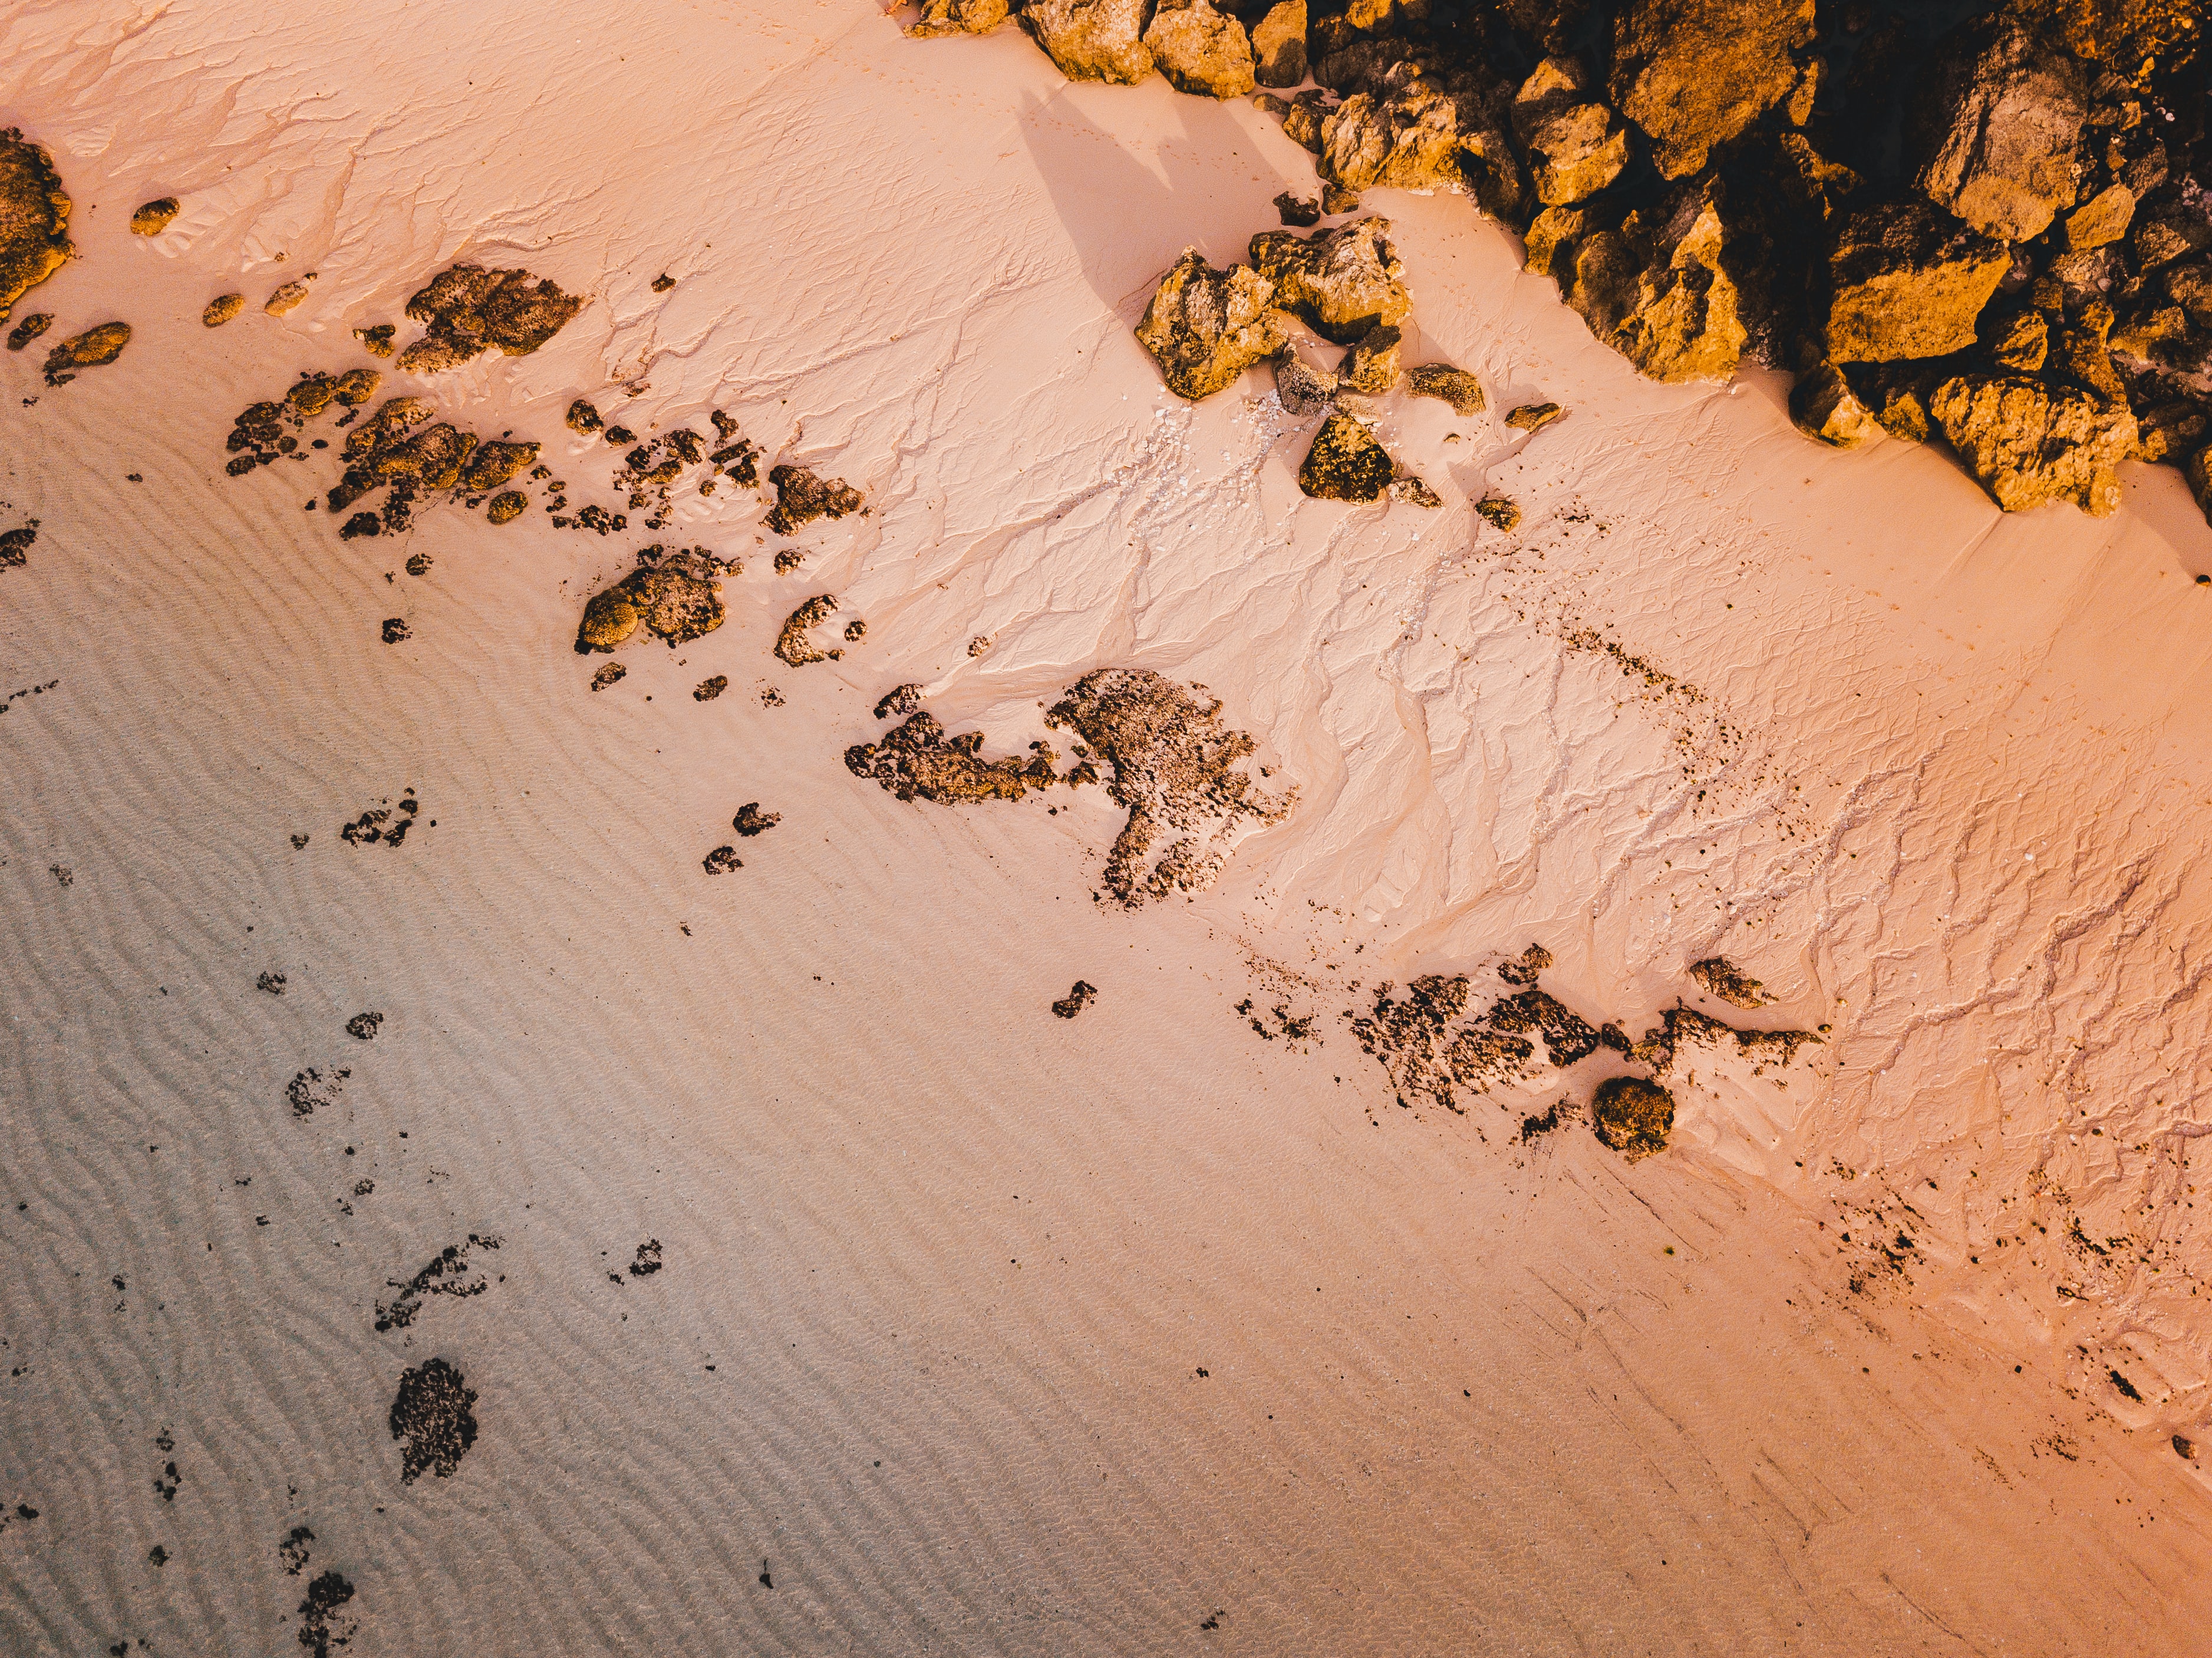 view from above, nature, beach, sand, rocks 32K